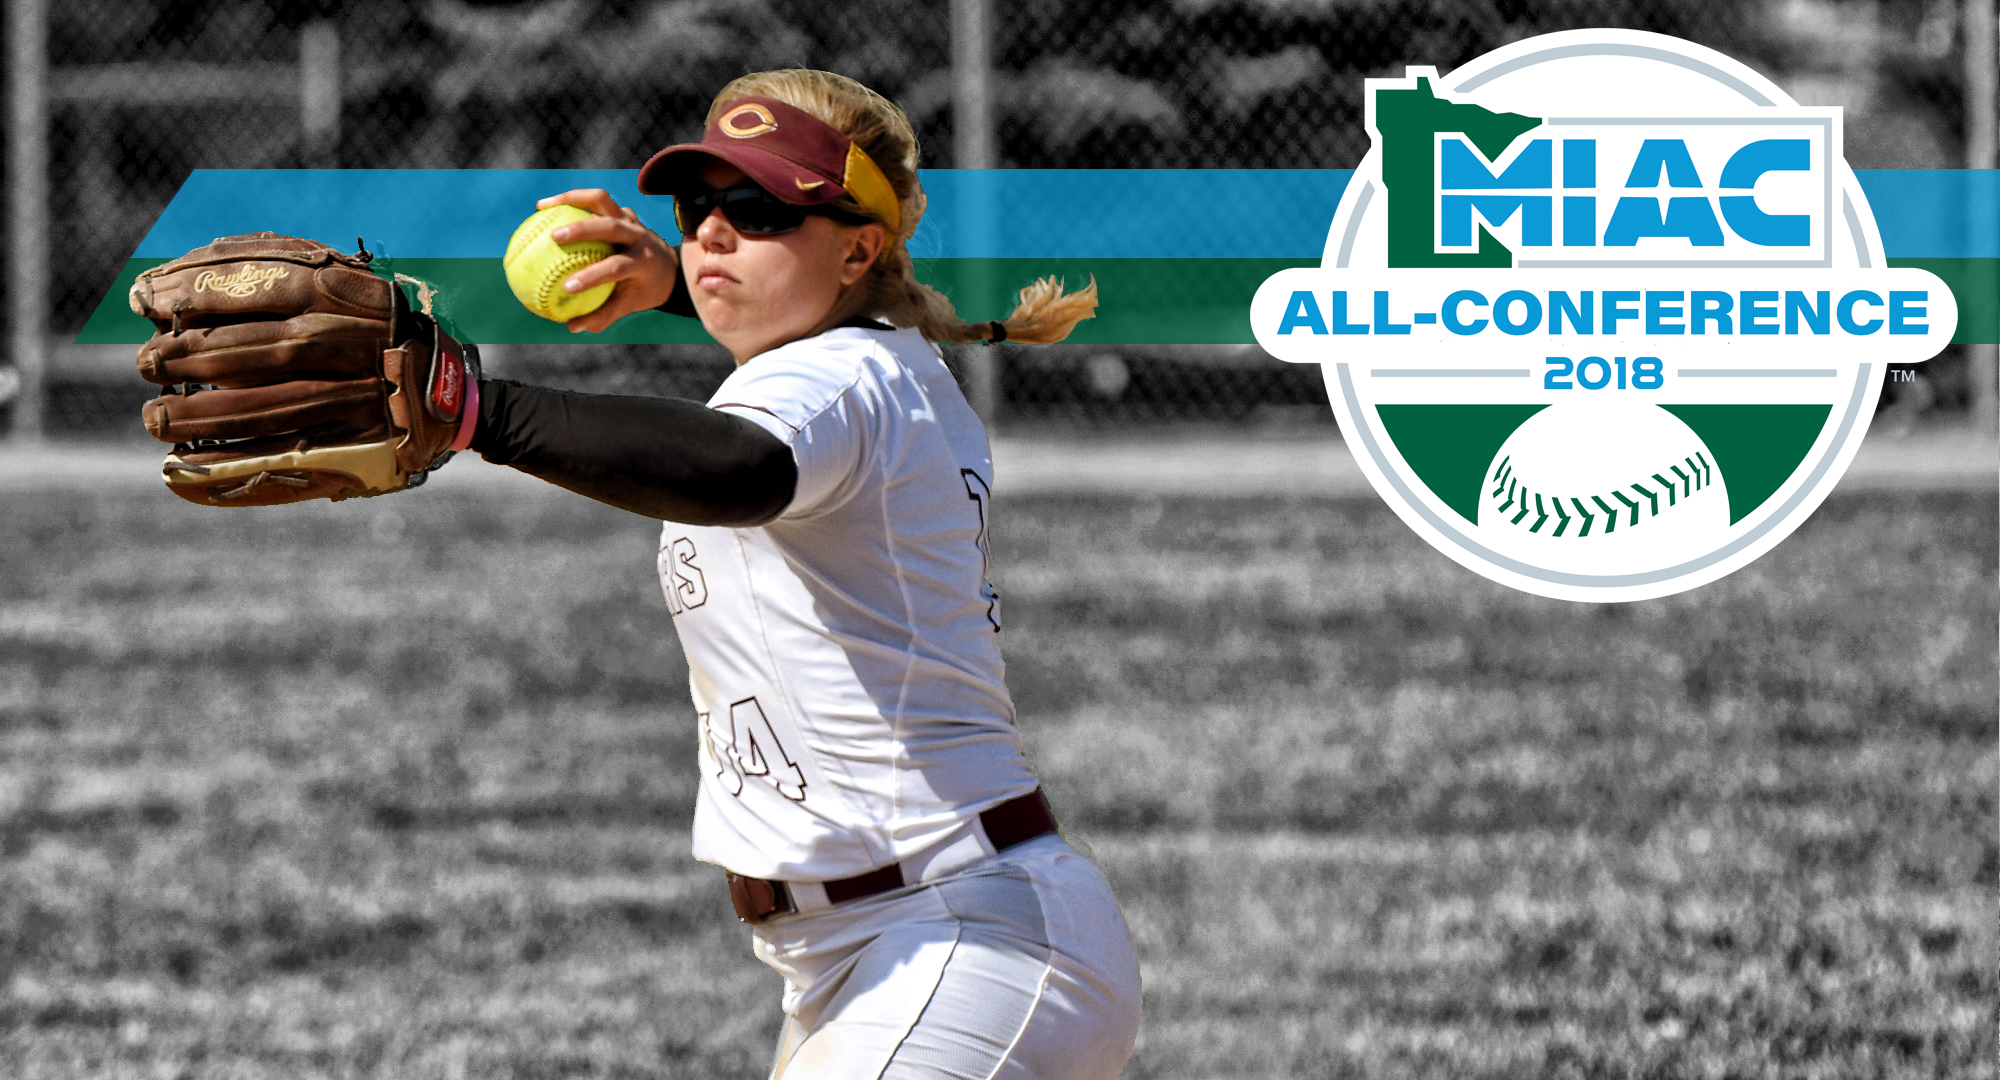 Sophomore Brooke Ankerfelt was named to the MIAC All-Conference Team after leading the team in hitting in league games.